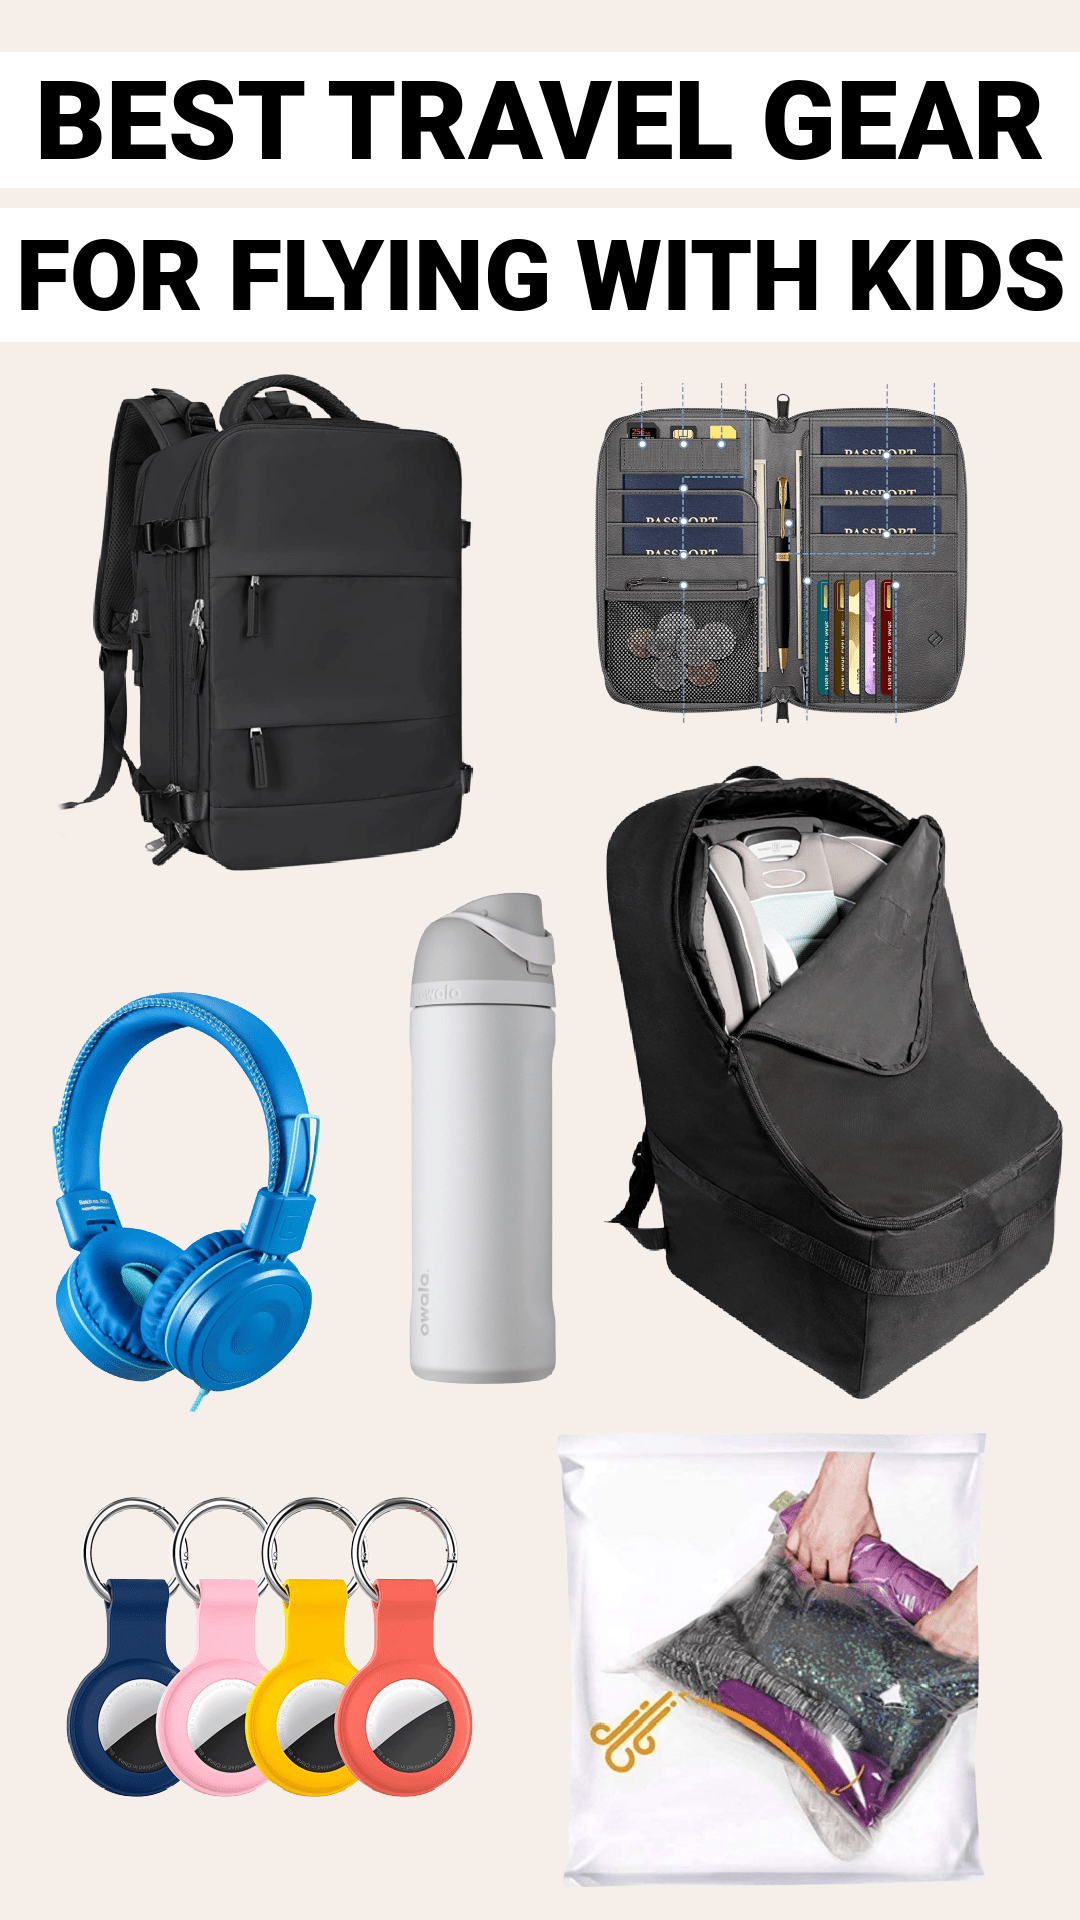 10 Most Useful Travel Accessories for Kids - In The Playroom